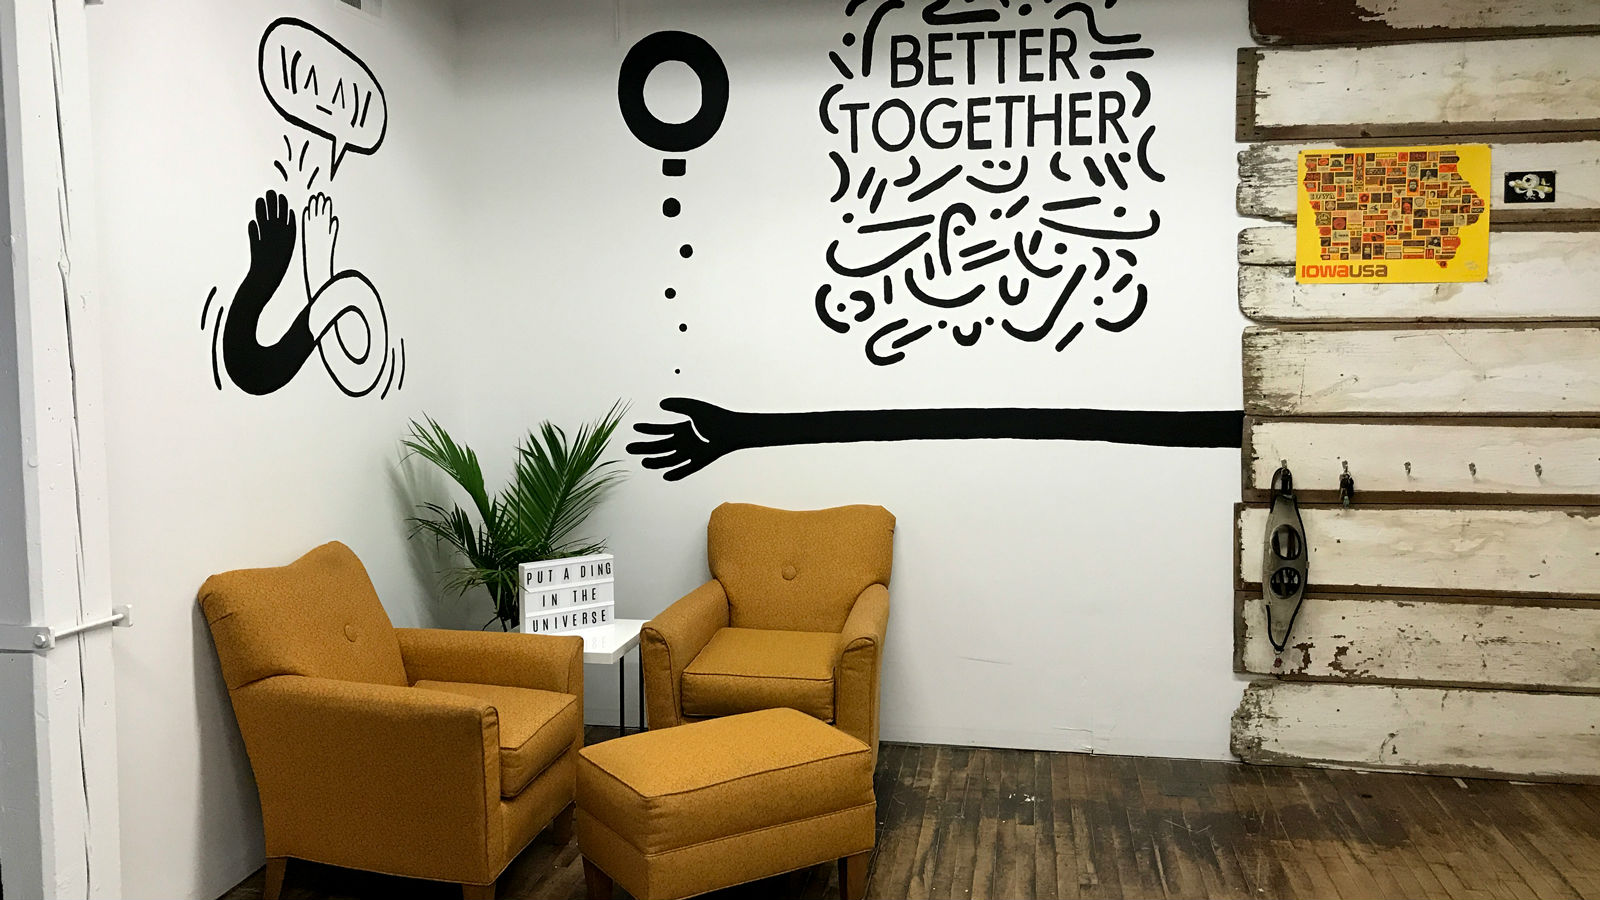 19. From the walls of Yoimono, a coworking space for creatives in Iowa